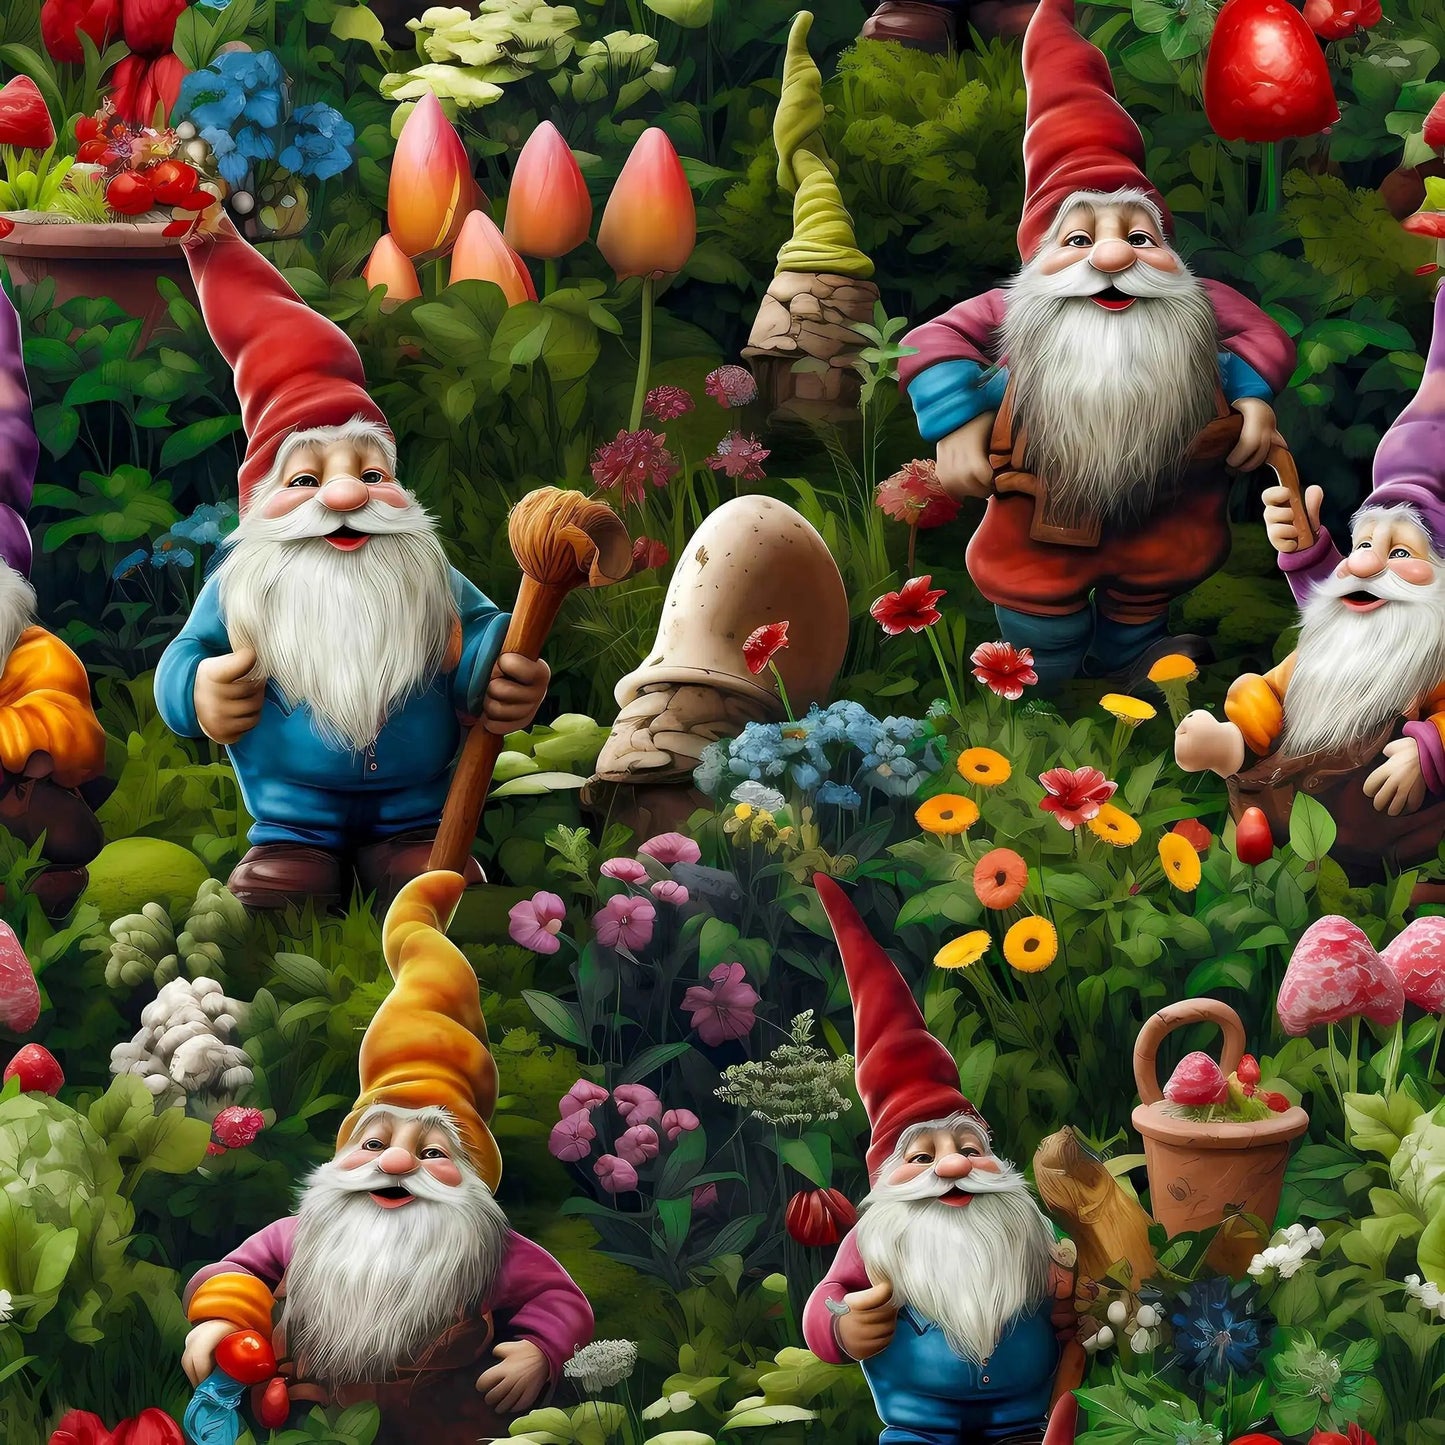 Garden Gnome Gift Wrapping Paper Rolls from The Curated Goose